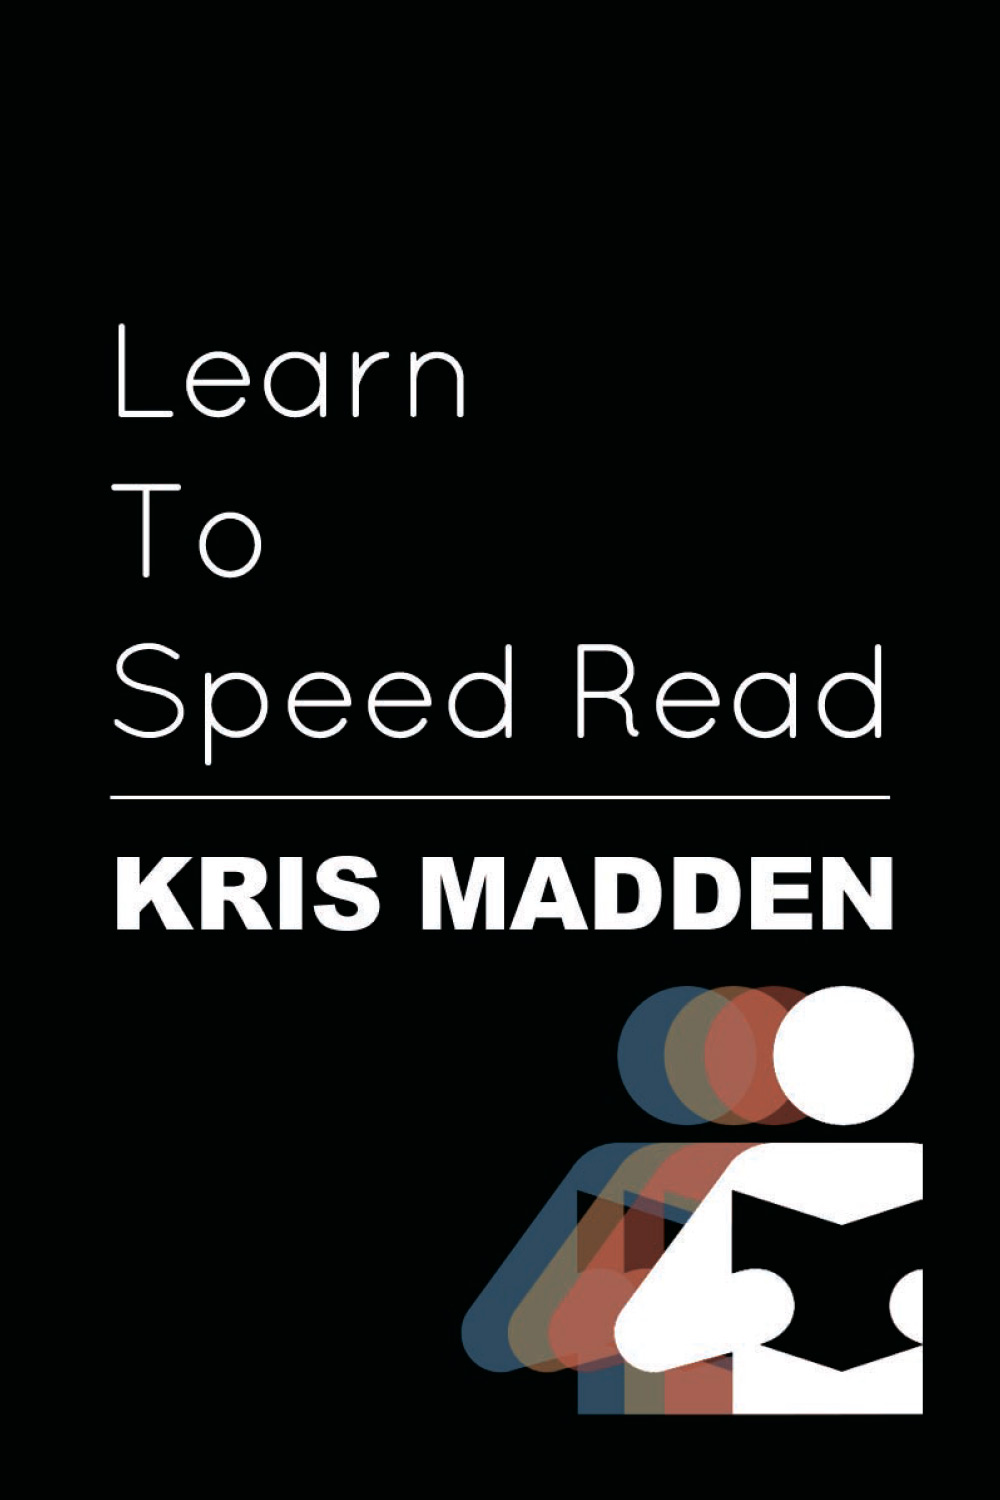 Learn To Speed Read: The Official Kris Madden Workbook